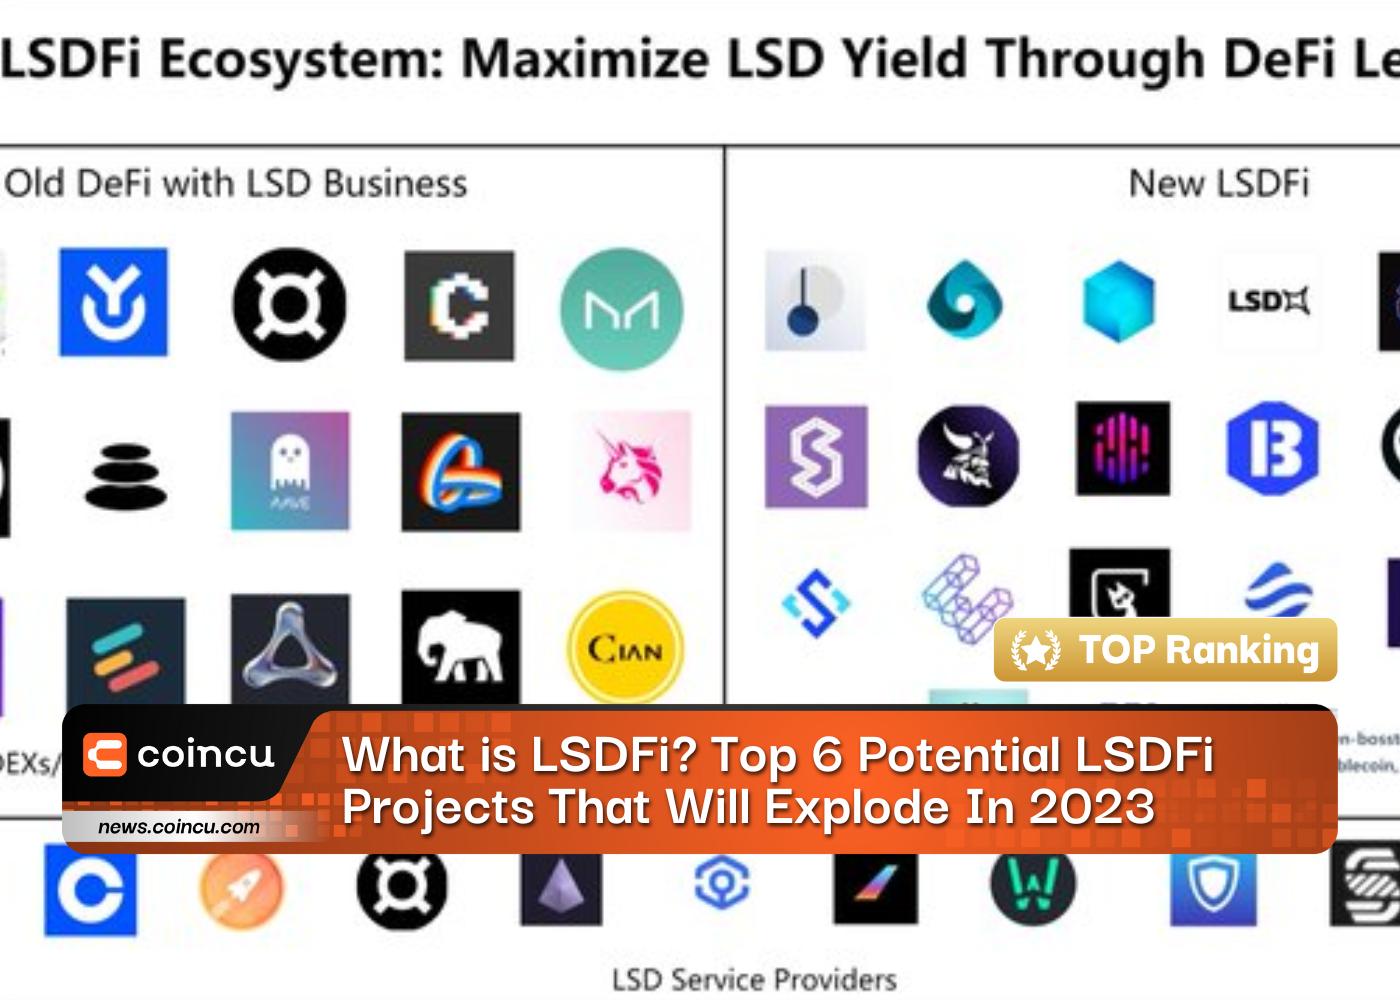 What is LSDFi? Top 6 Potential LSDFi Projects That Will Explode In 2023